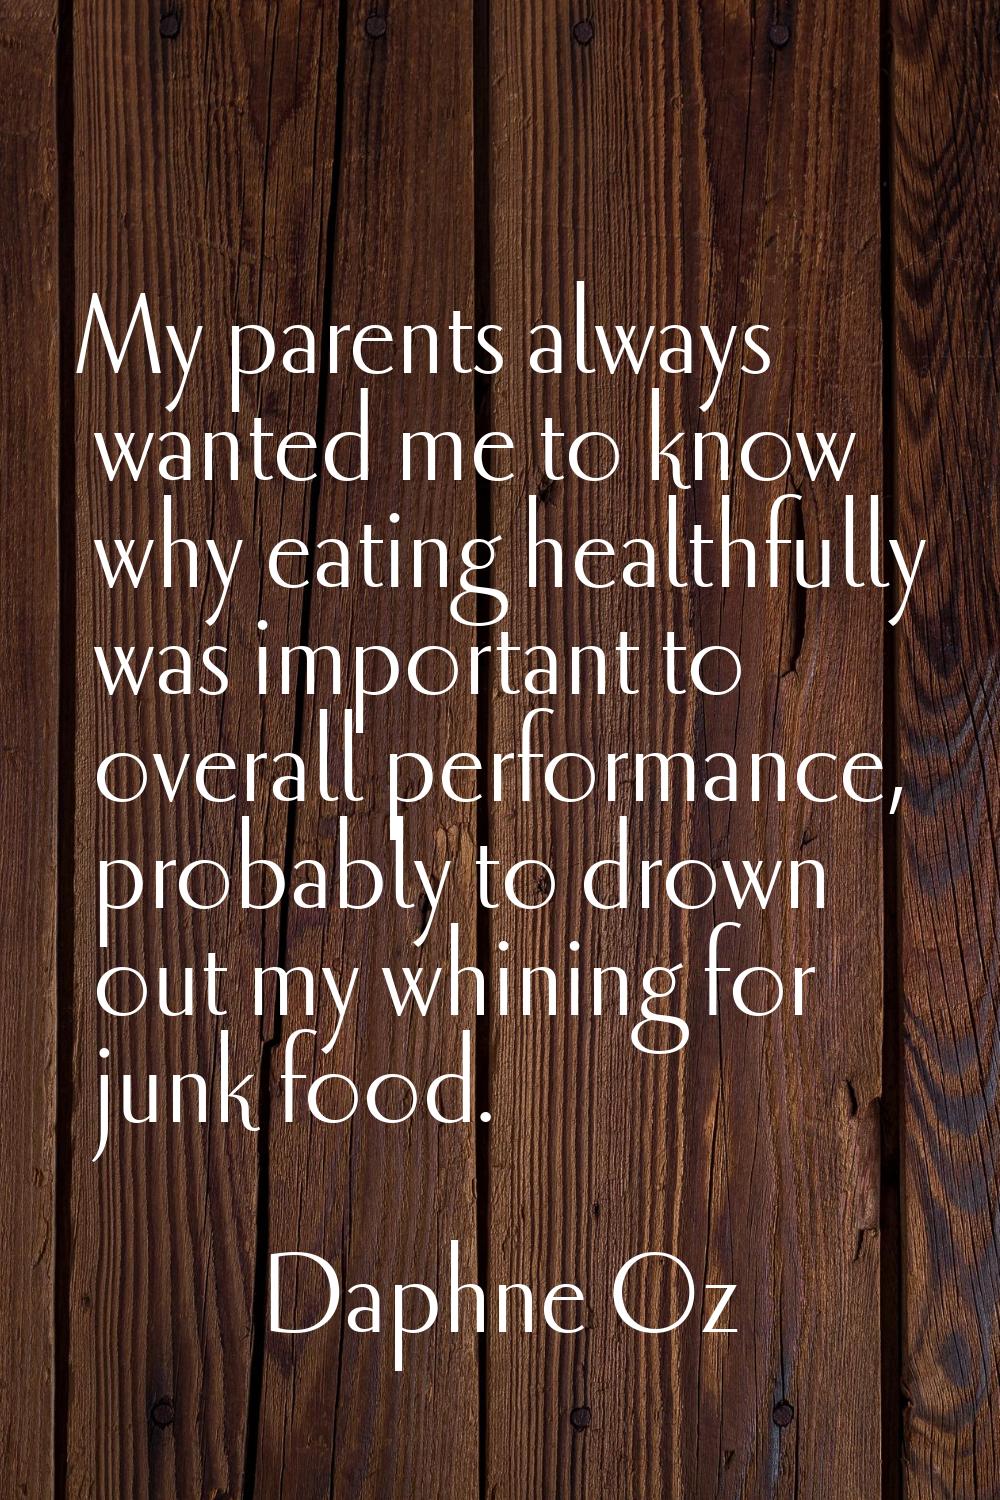 My parents always wanted me to know why eating healthfully was important to overall performance, pr